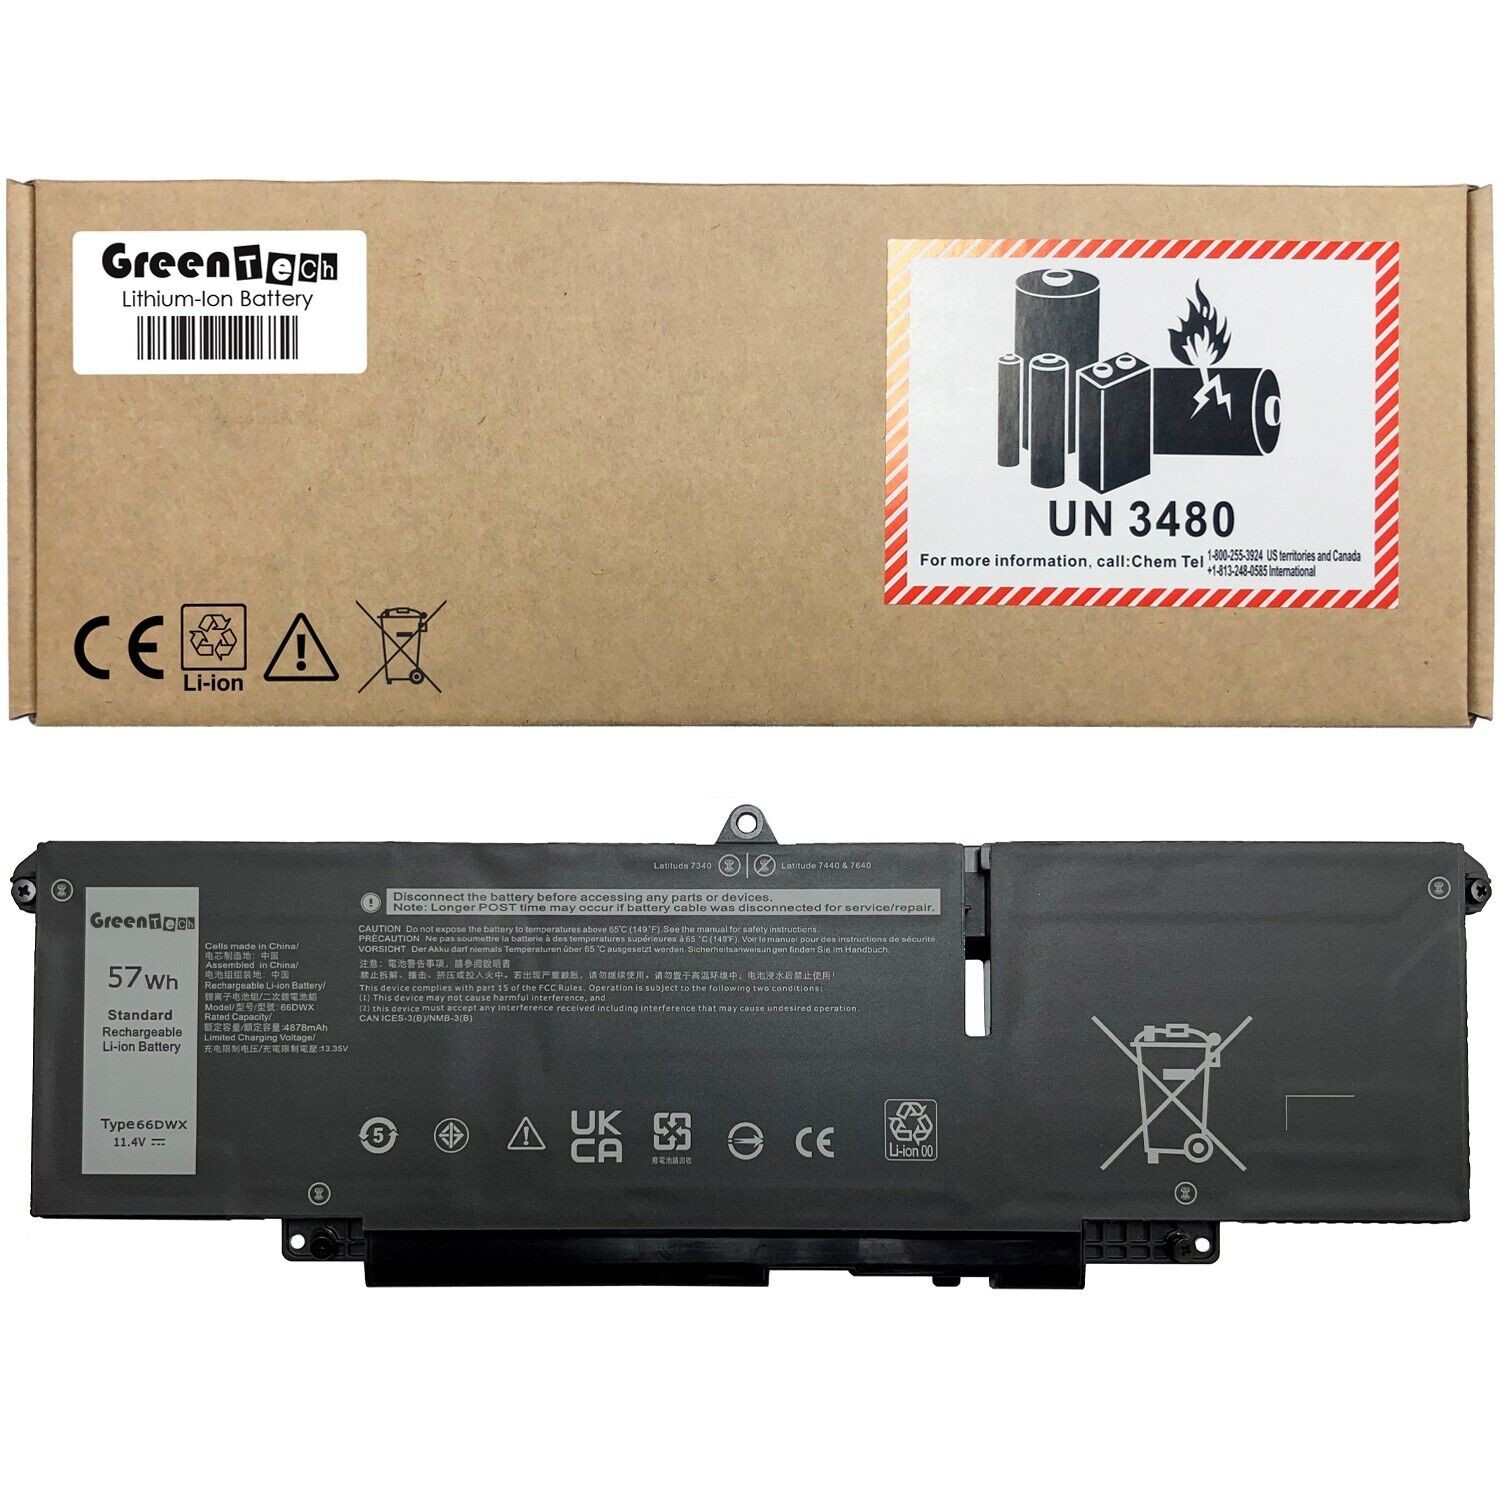 GREENTECH 66DWX BATTERY FOR DELL LATITUDE 7340 7440 7640 57WHR 86D0Y JNYT4 WW8N8